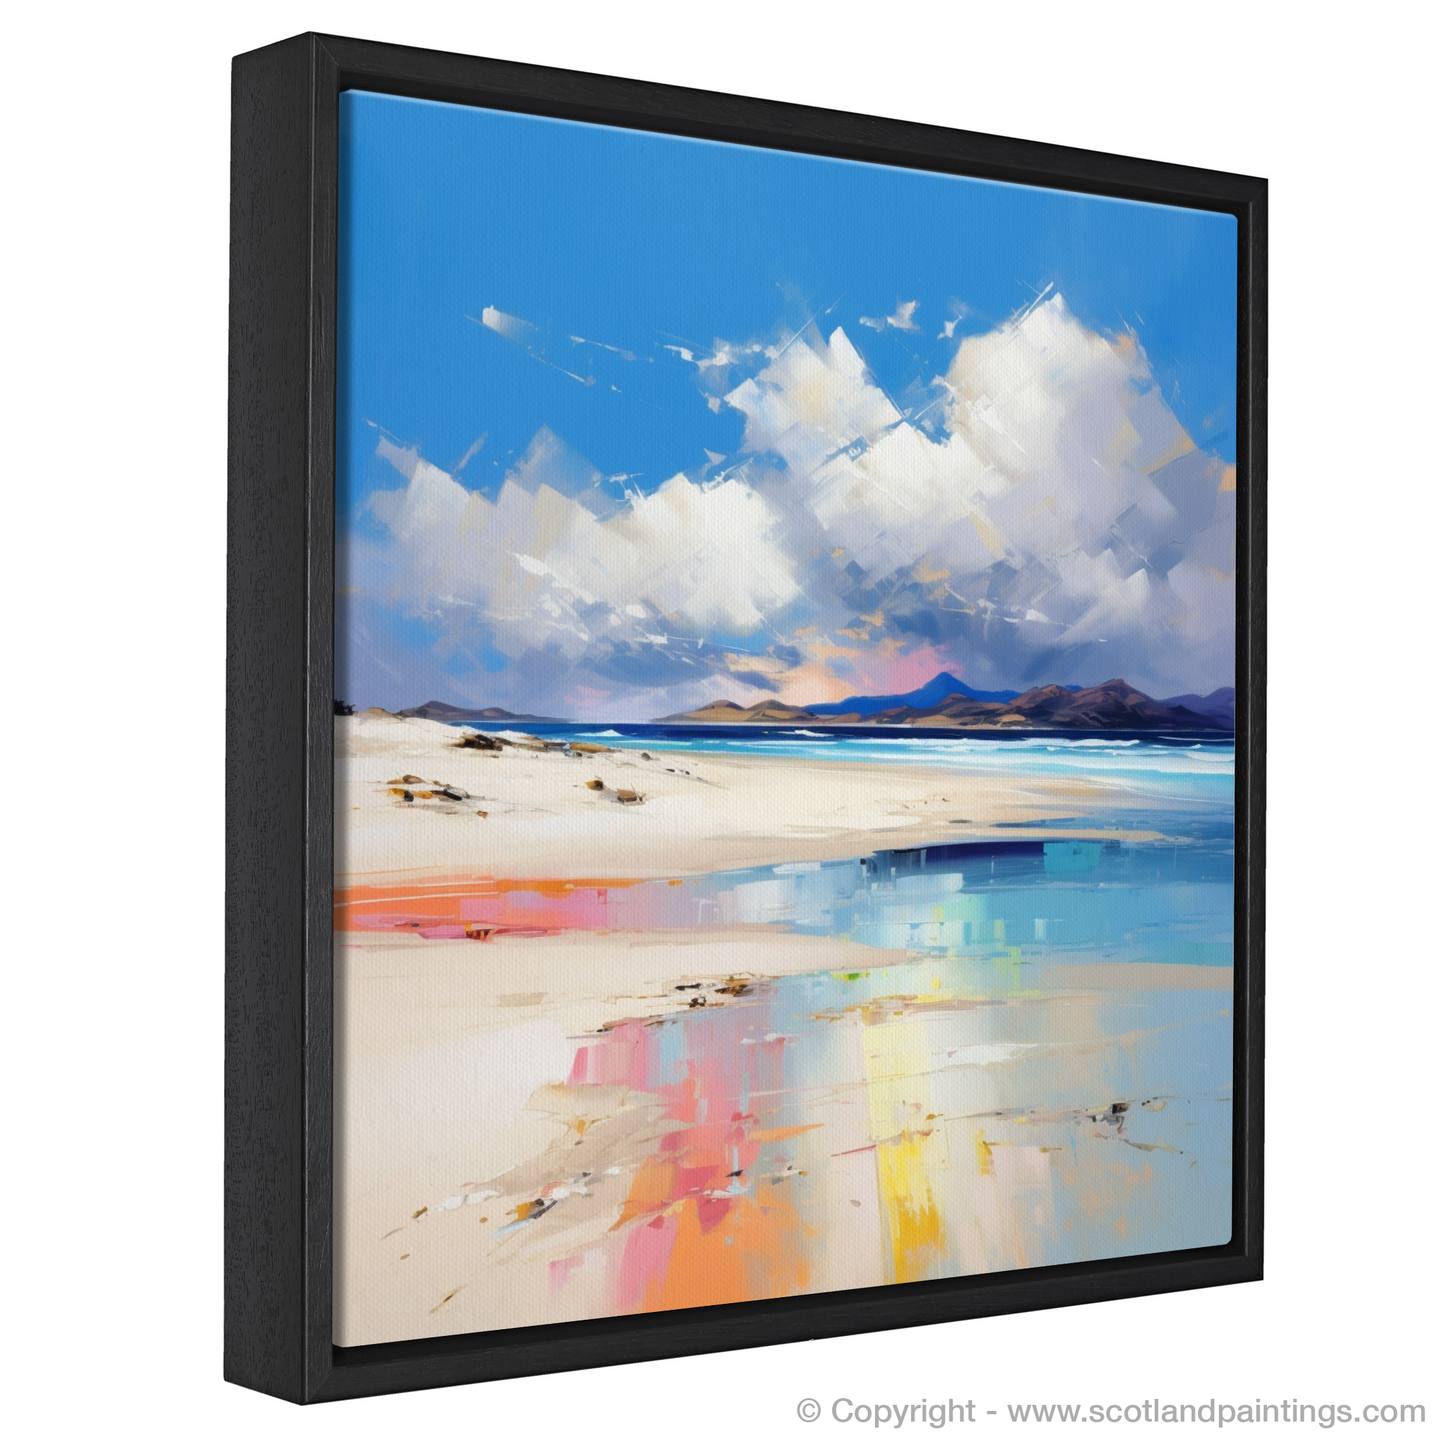 Painting and Art Print of Luskentyre Beach, Isle of Harris entitled "Luskentyre Beach: An Expressionist Ode to Scottish Serenity".